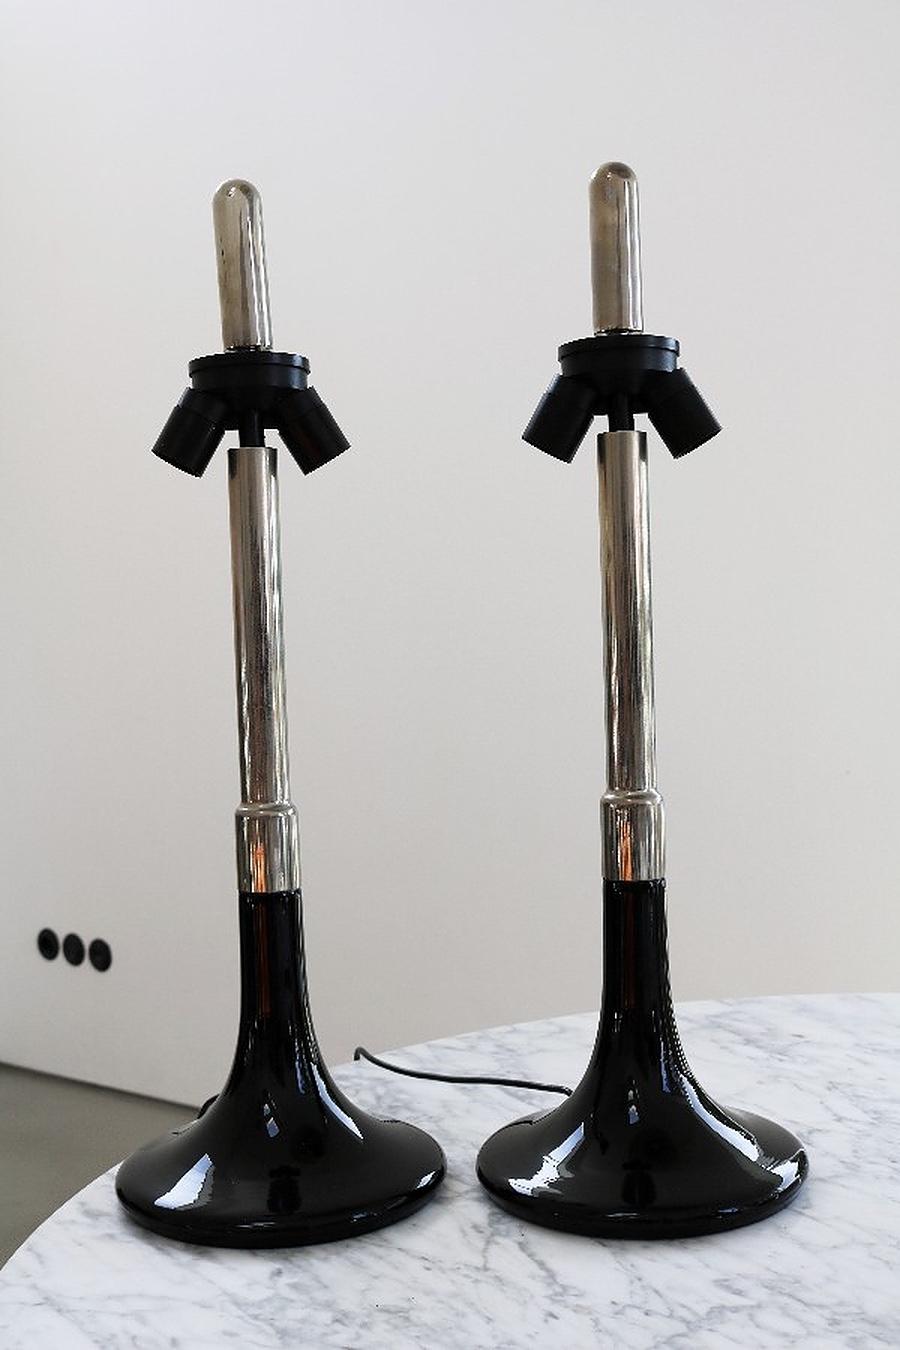 Pair of table lamps by Ingo Maurer, 1970s
Set of 2 table lamps in black glass, model 